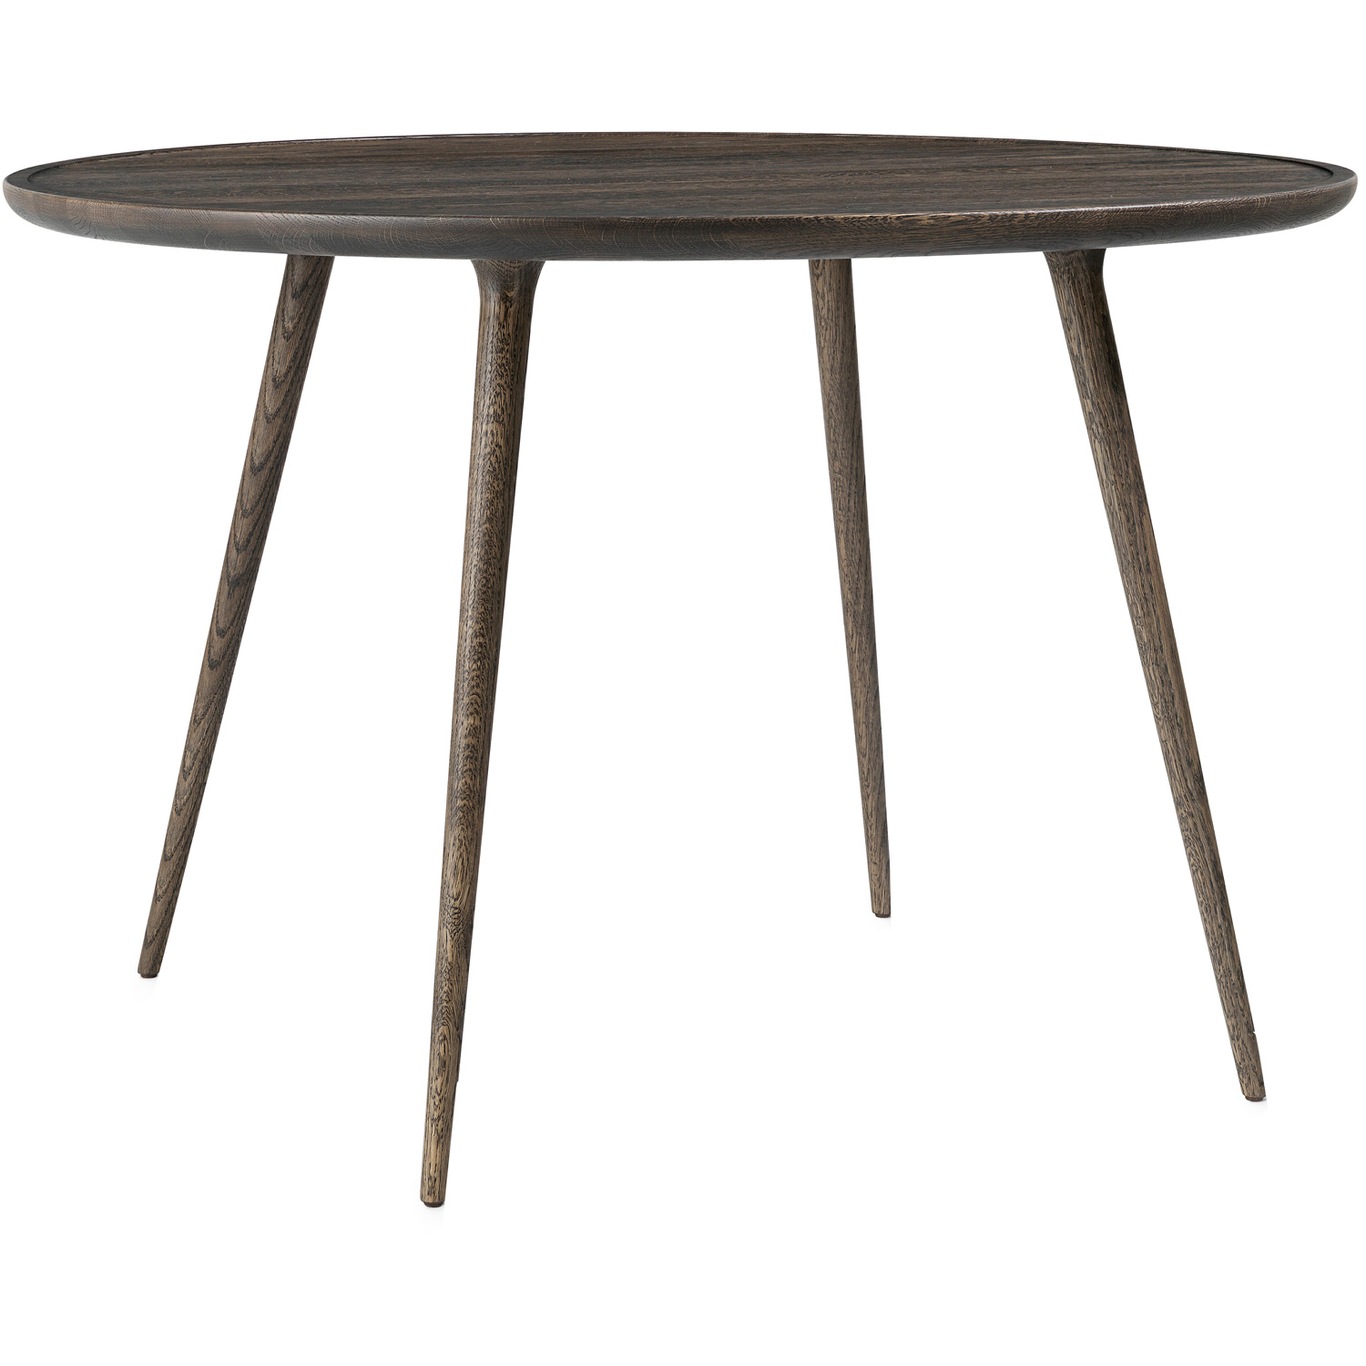 Accent Dining Table Sirka Grey Stained Oak, 110 cm